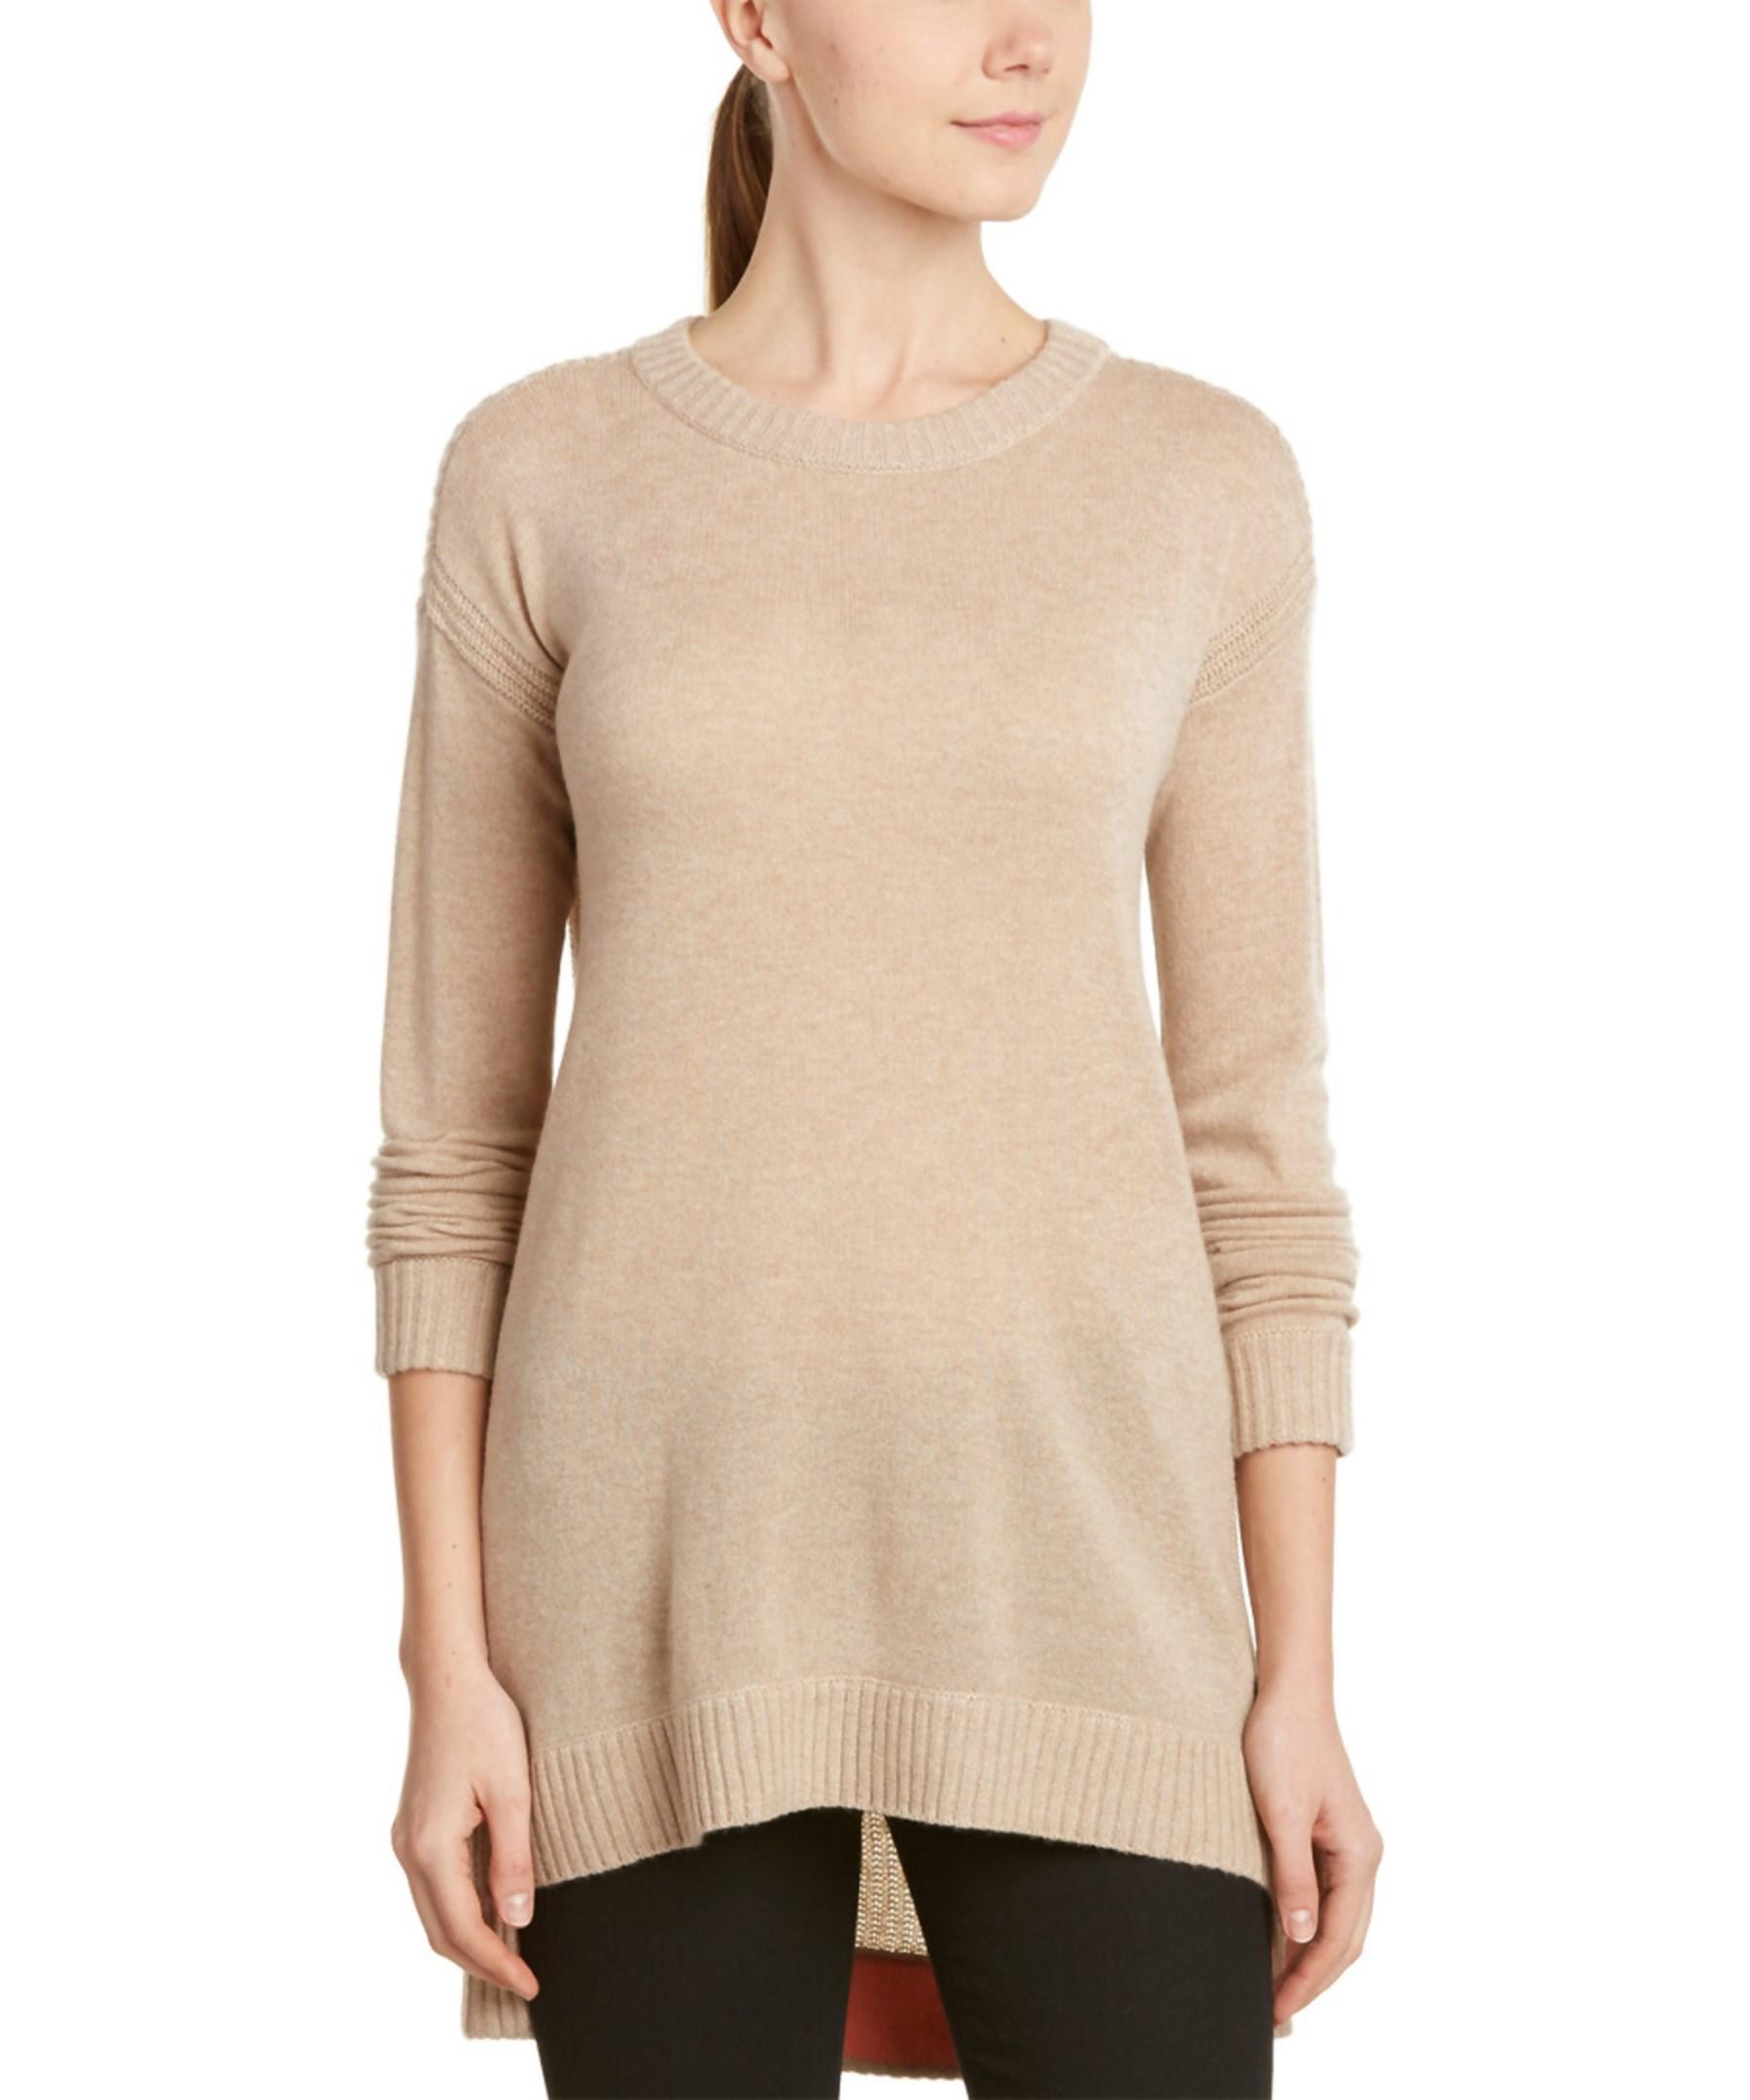 Lyst - Magaschoni Cashmere Tunic in Natural